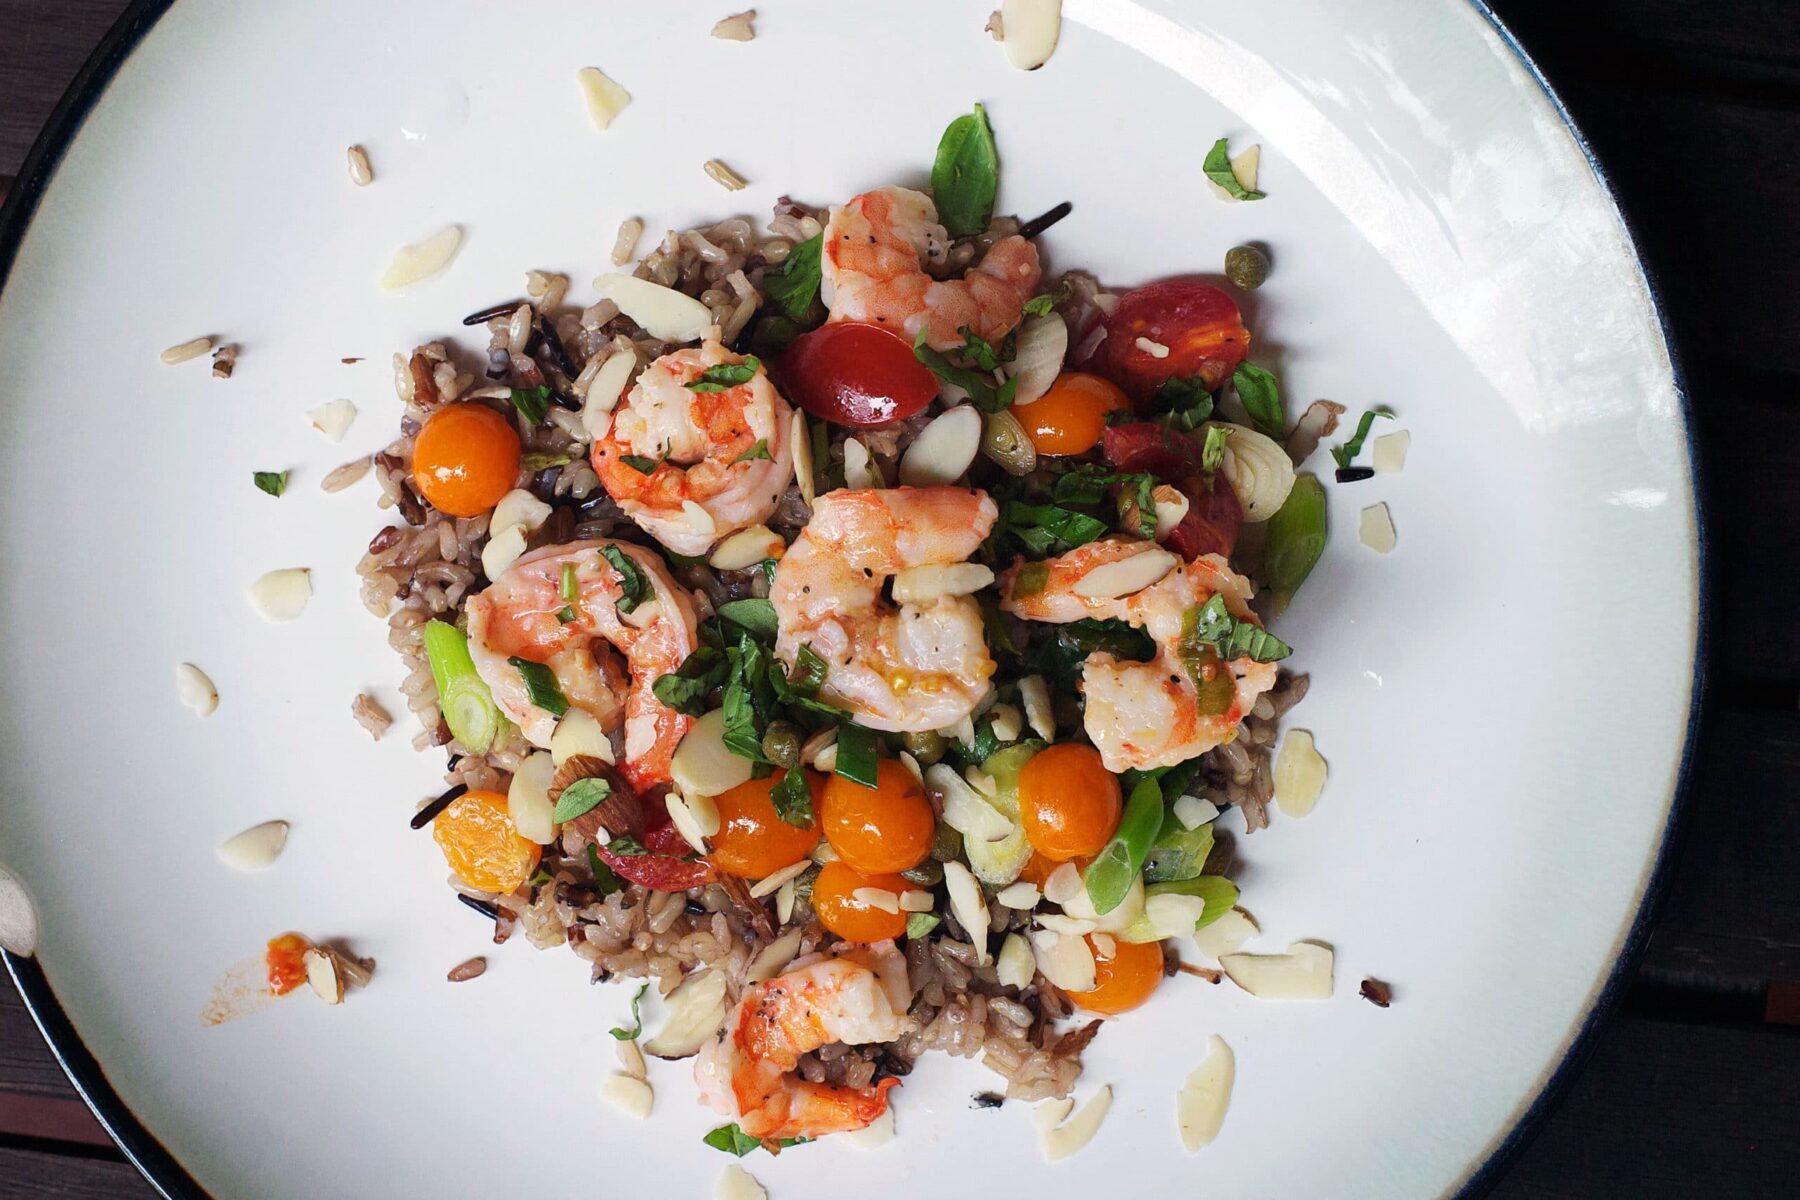 Lemon Shrimp, Capers, halved cherry tomatoes with sliced green onions over wild rice. Almond and Parmesan cheese garnish. top view.